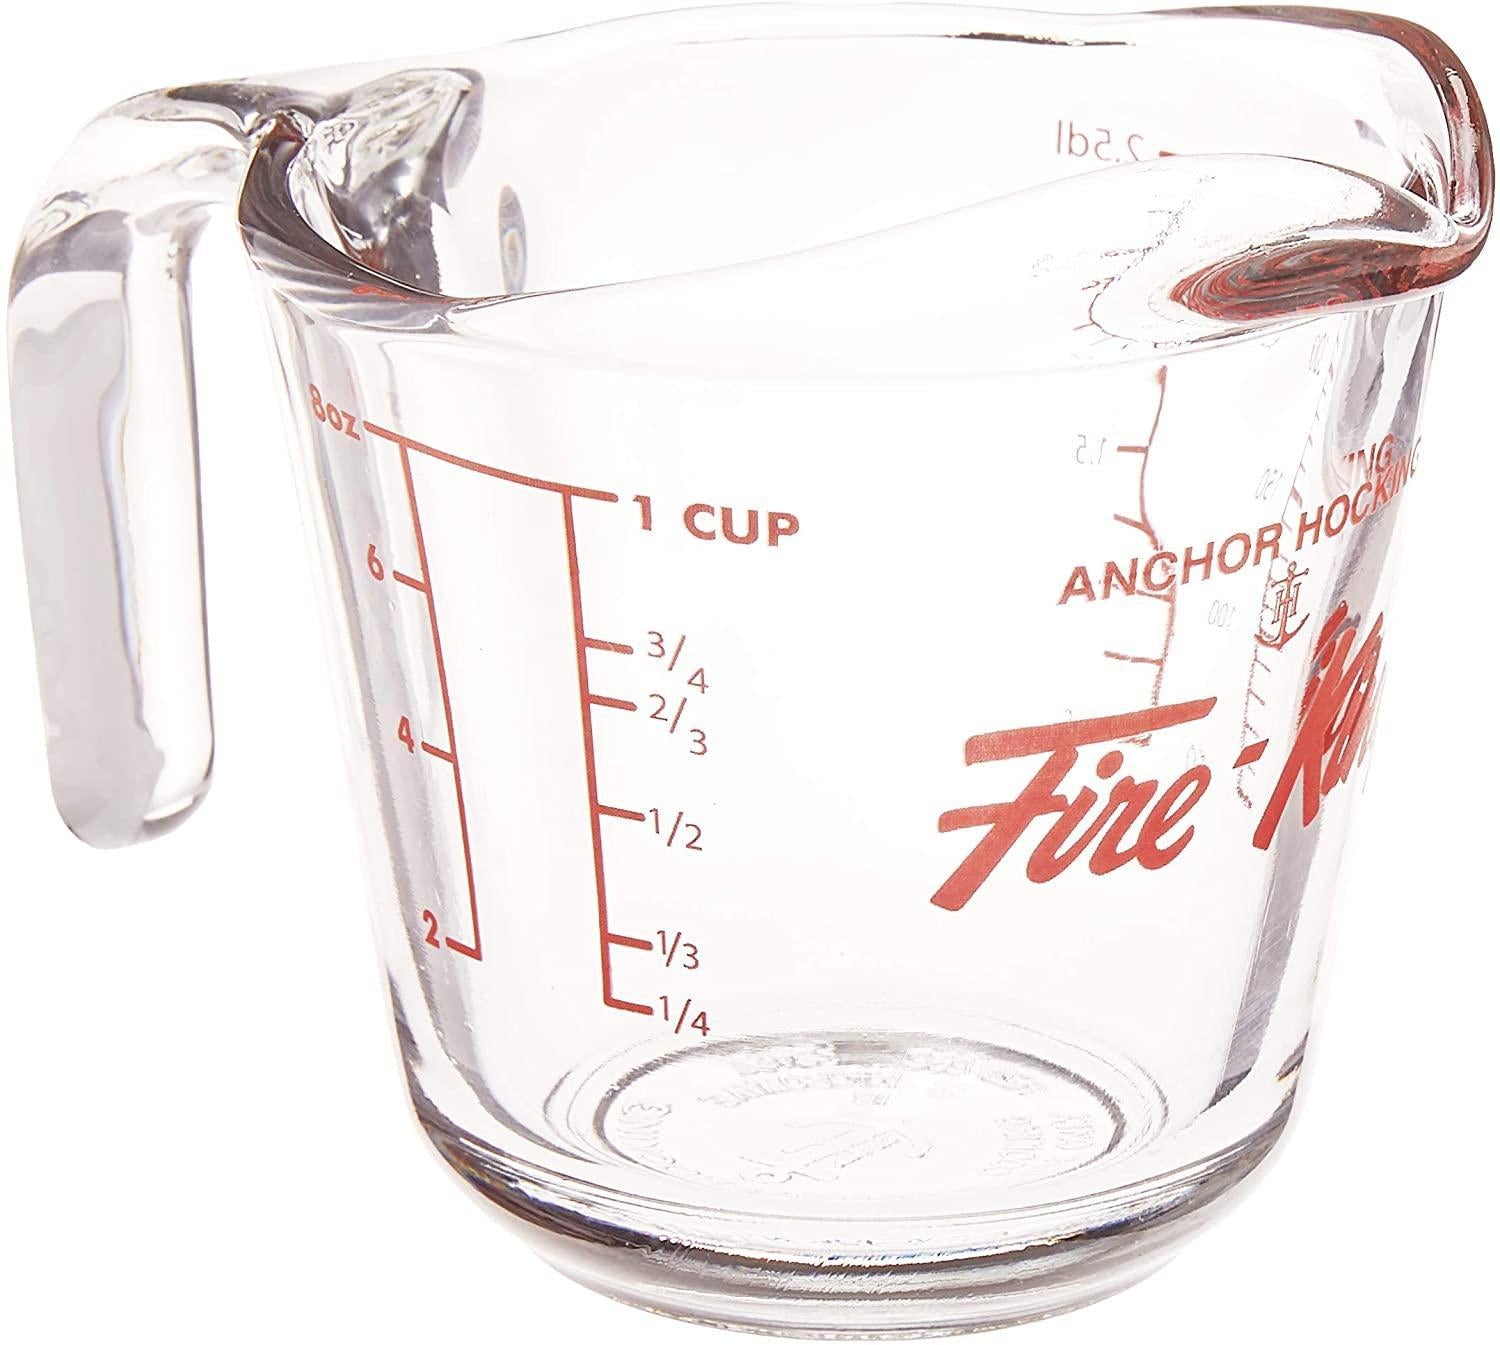 Anchor Hocking 2 Cup Glass Measuring Cup - Cook on Bay